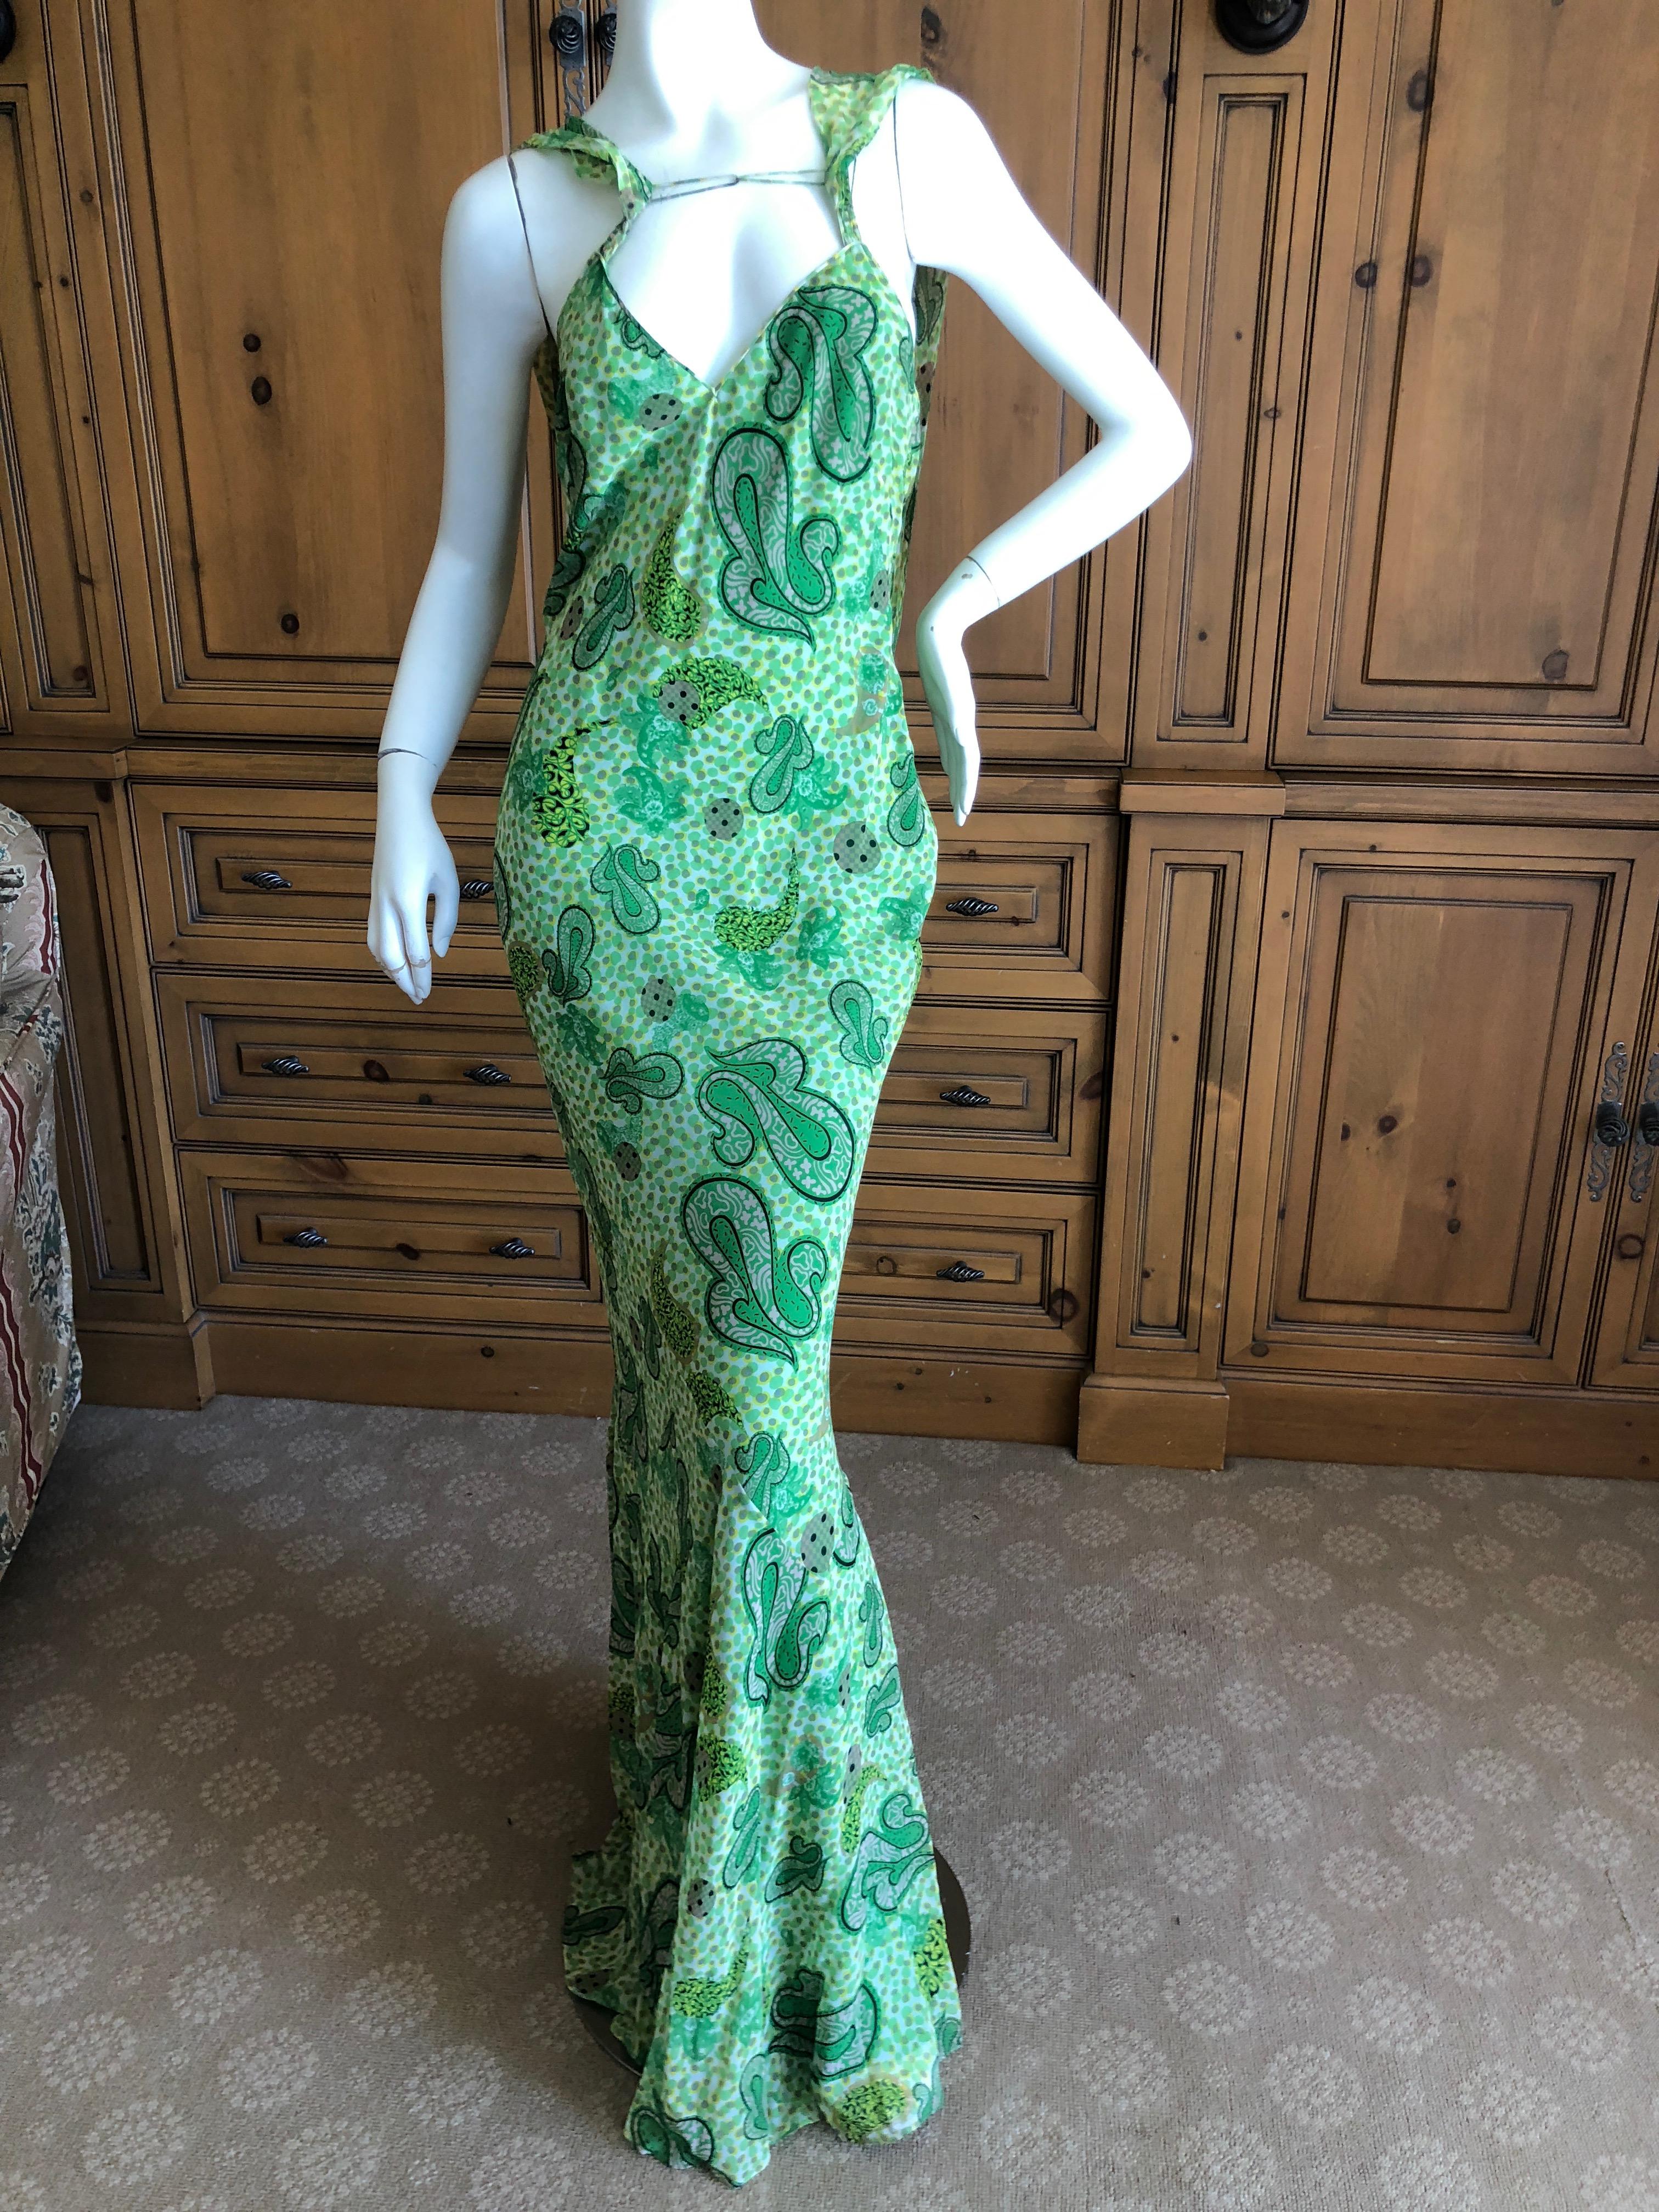  John Galliano Vintage Green Silk Paisley Ruffled Evening Dress with Cowl Back.
Please use the zoom feature to see the details.
Size 42
 Bust 36